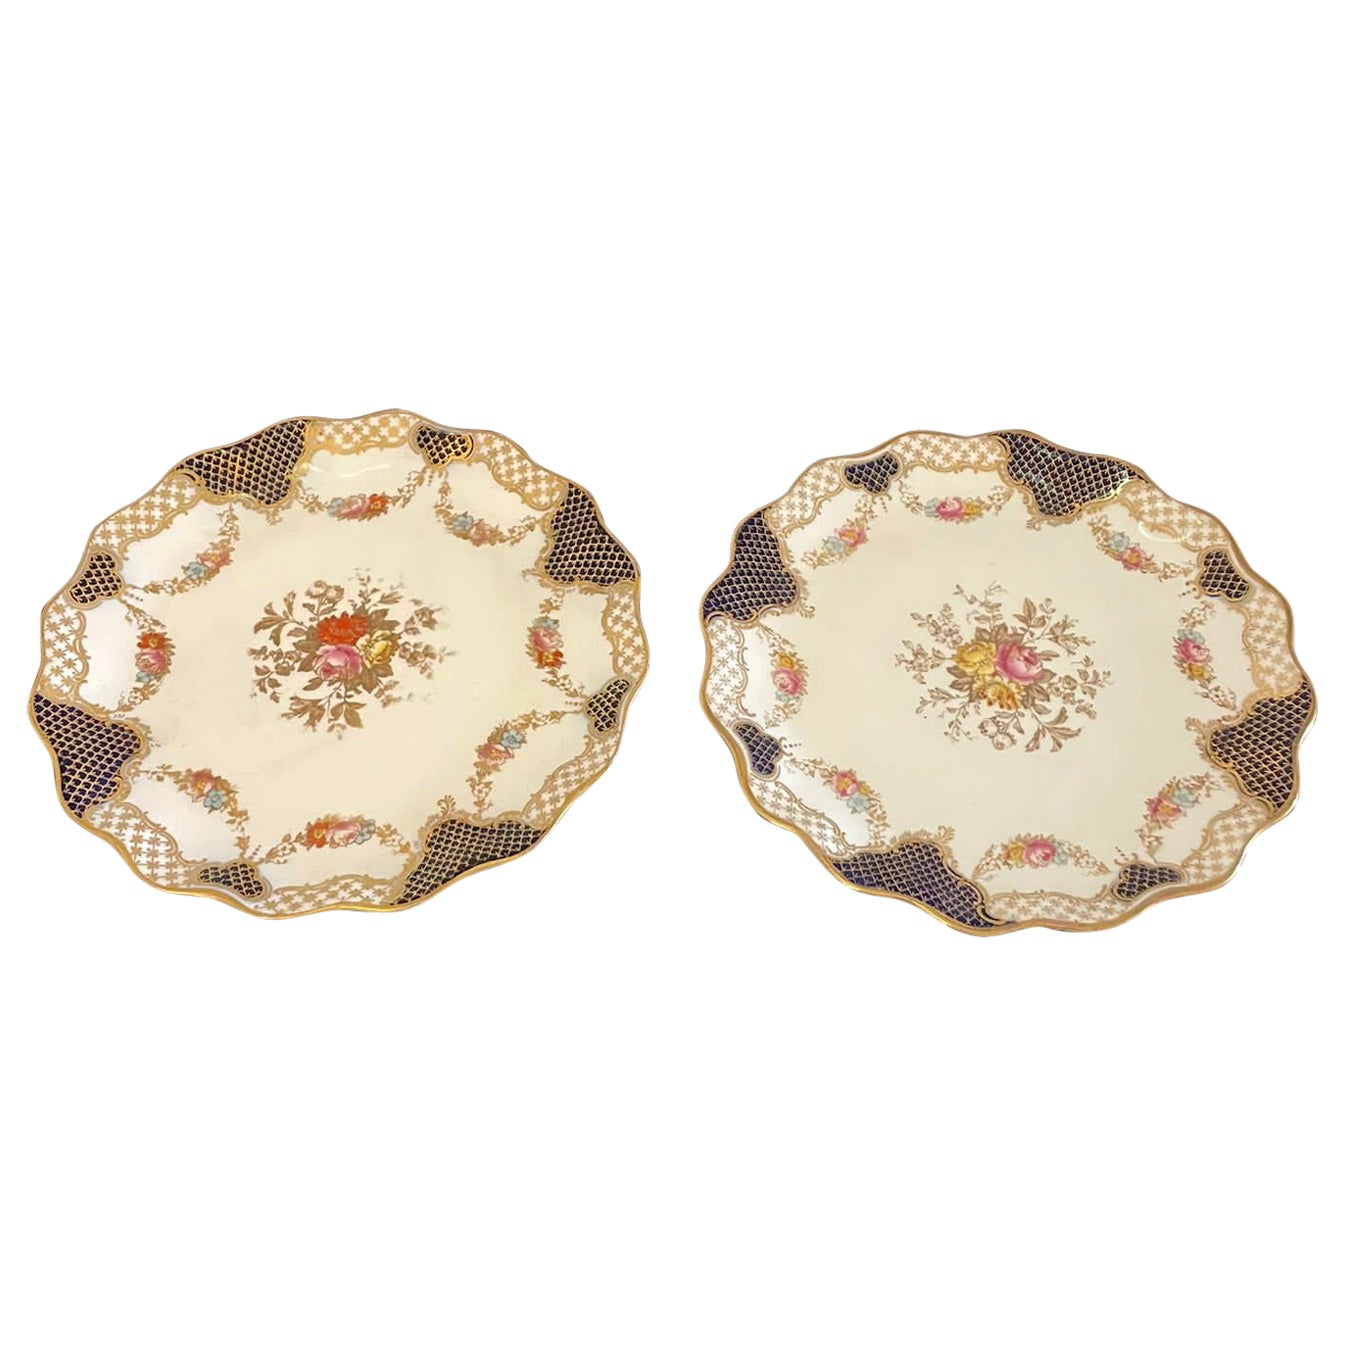 Superb Quality Pair of Antique Edwardian Hand Painted Wedgwood Shaped Plates  For Sale